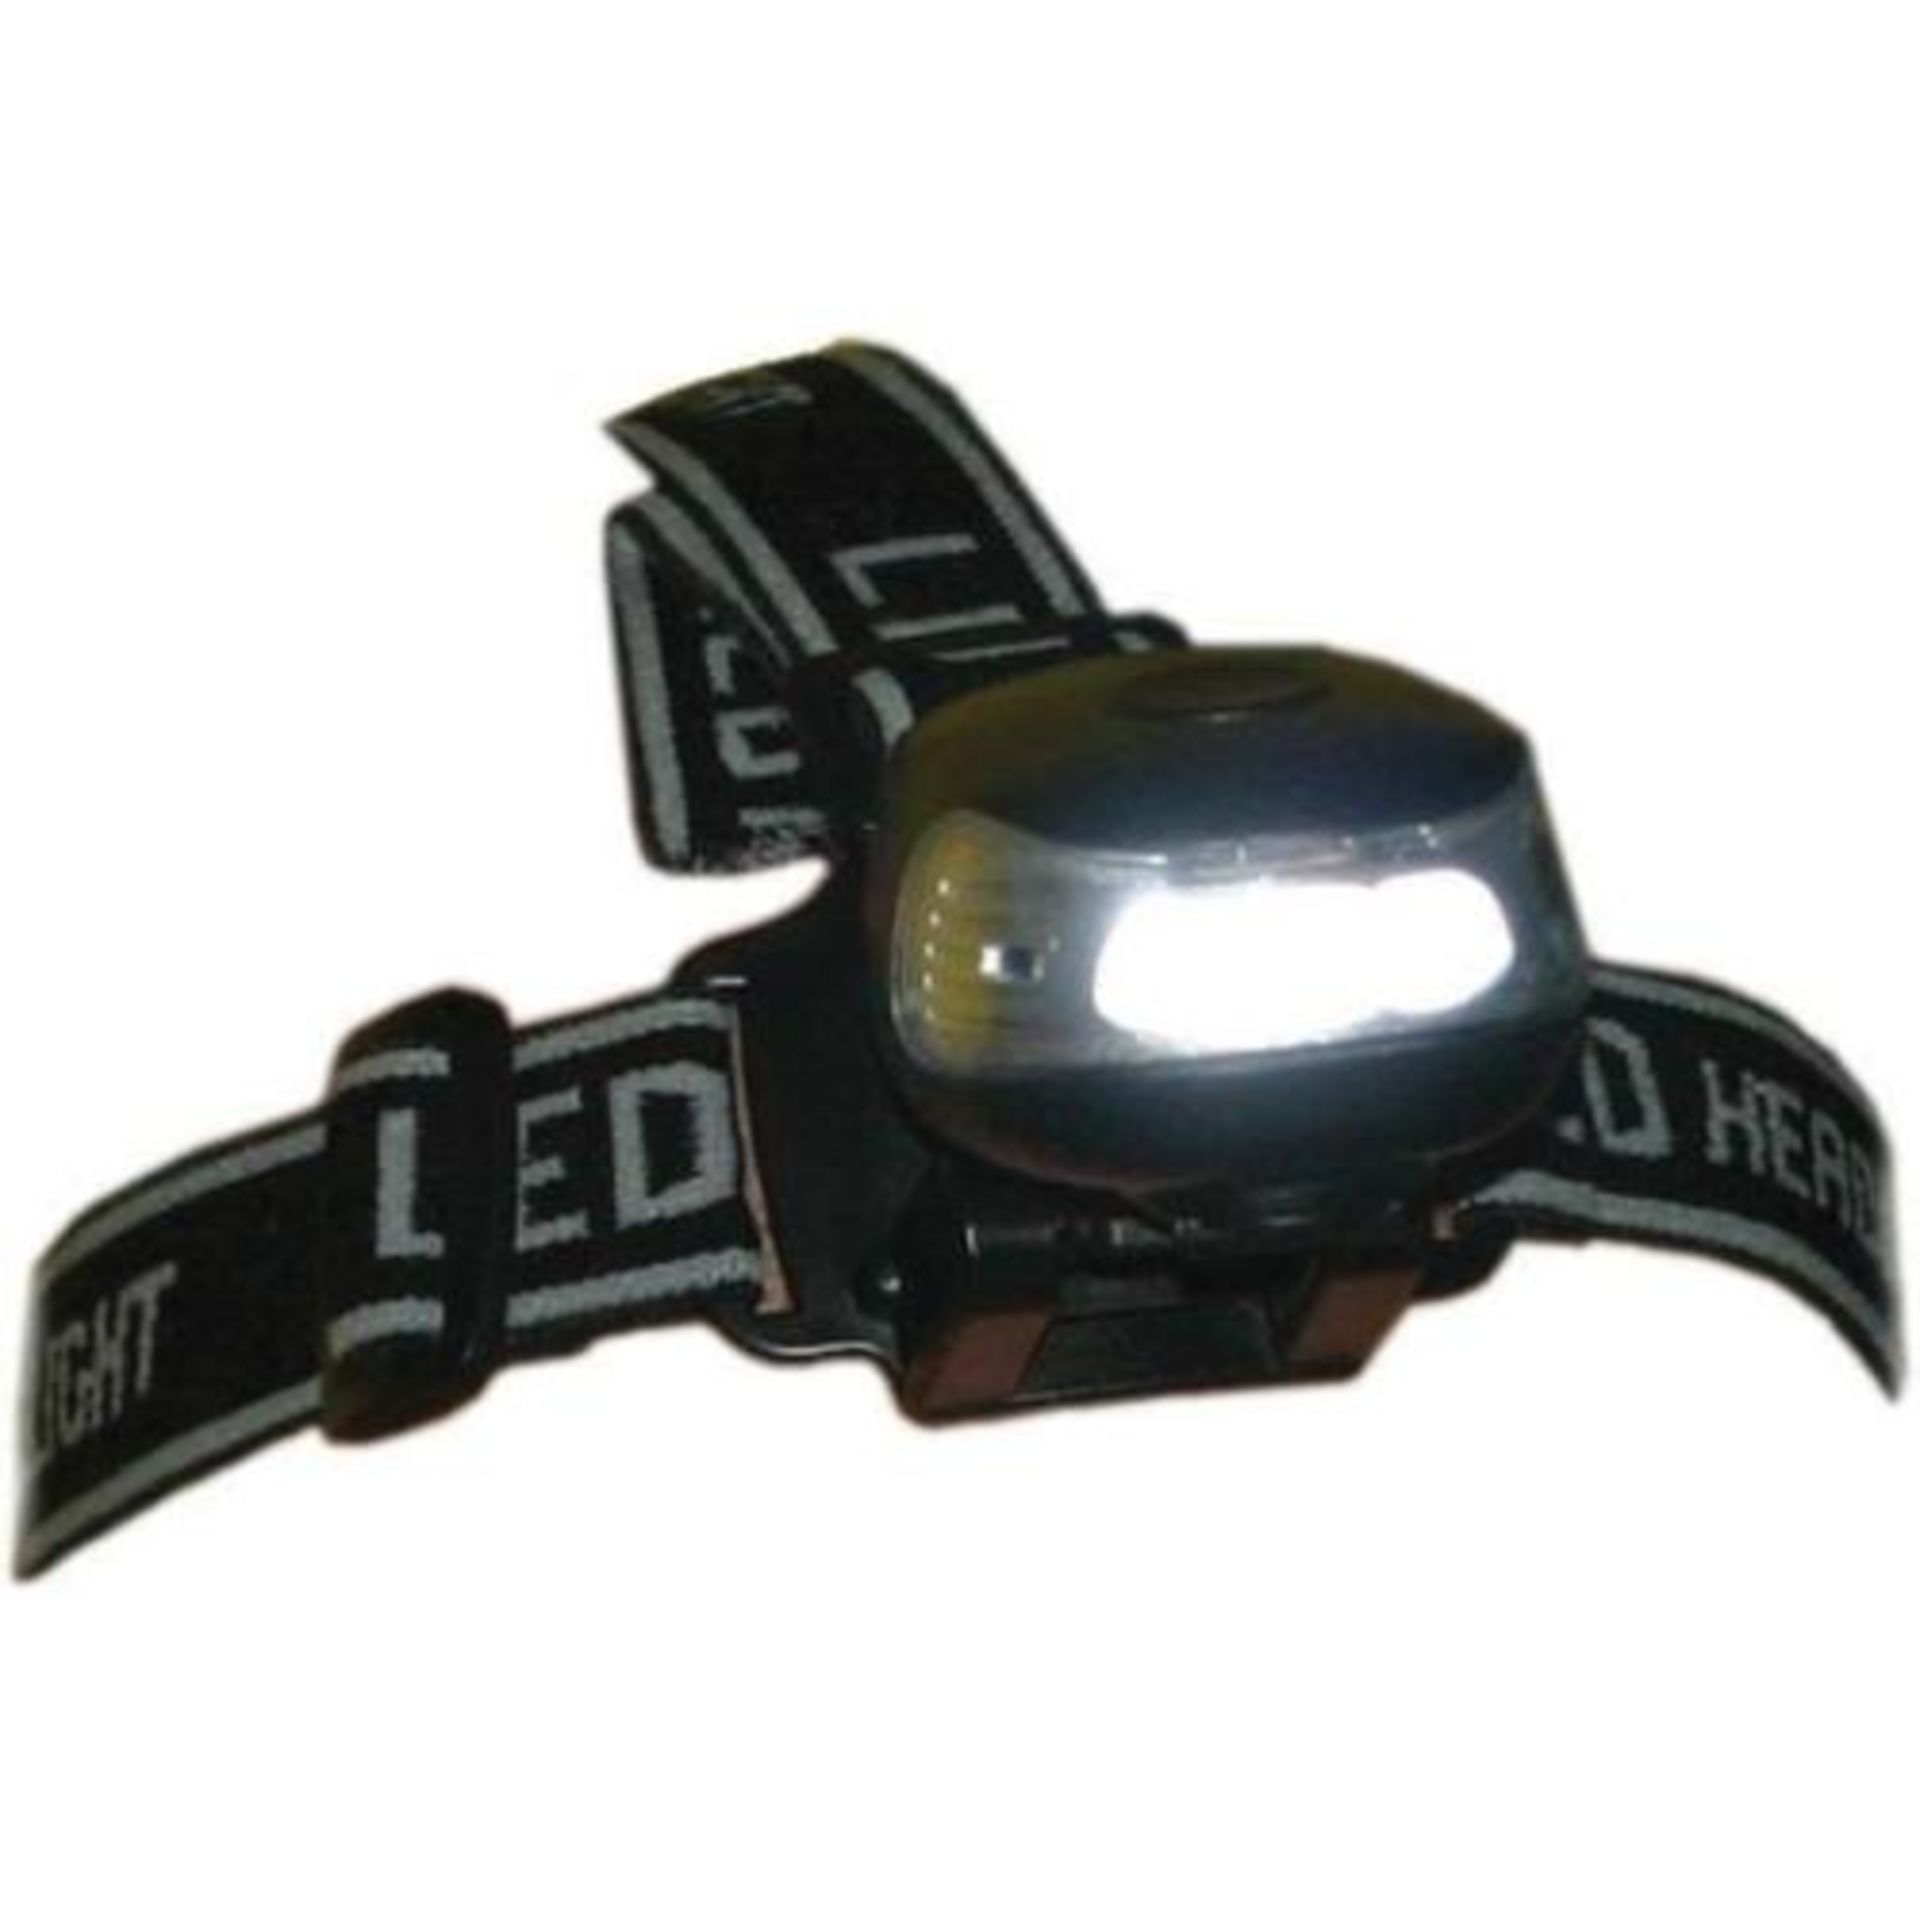 V Tritronic Wind Up LED Headlamp X  2  Bid price to be multiplied by Two